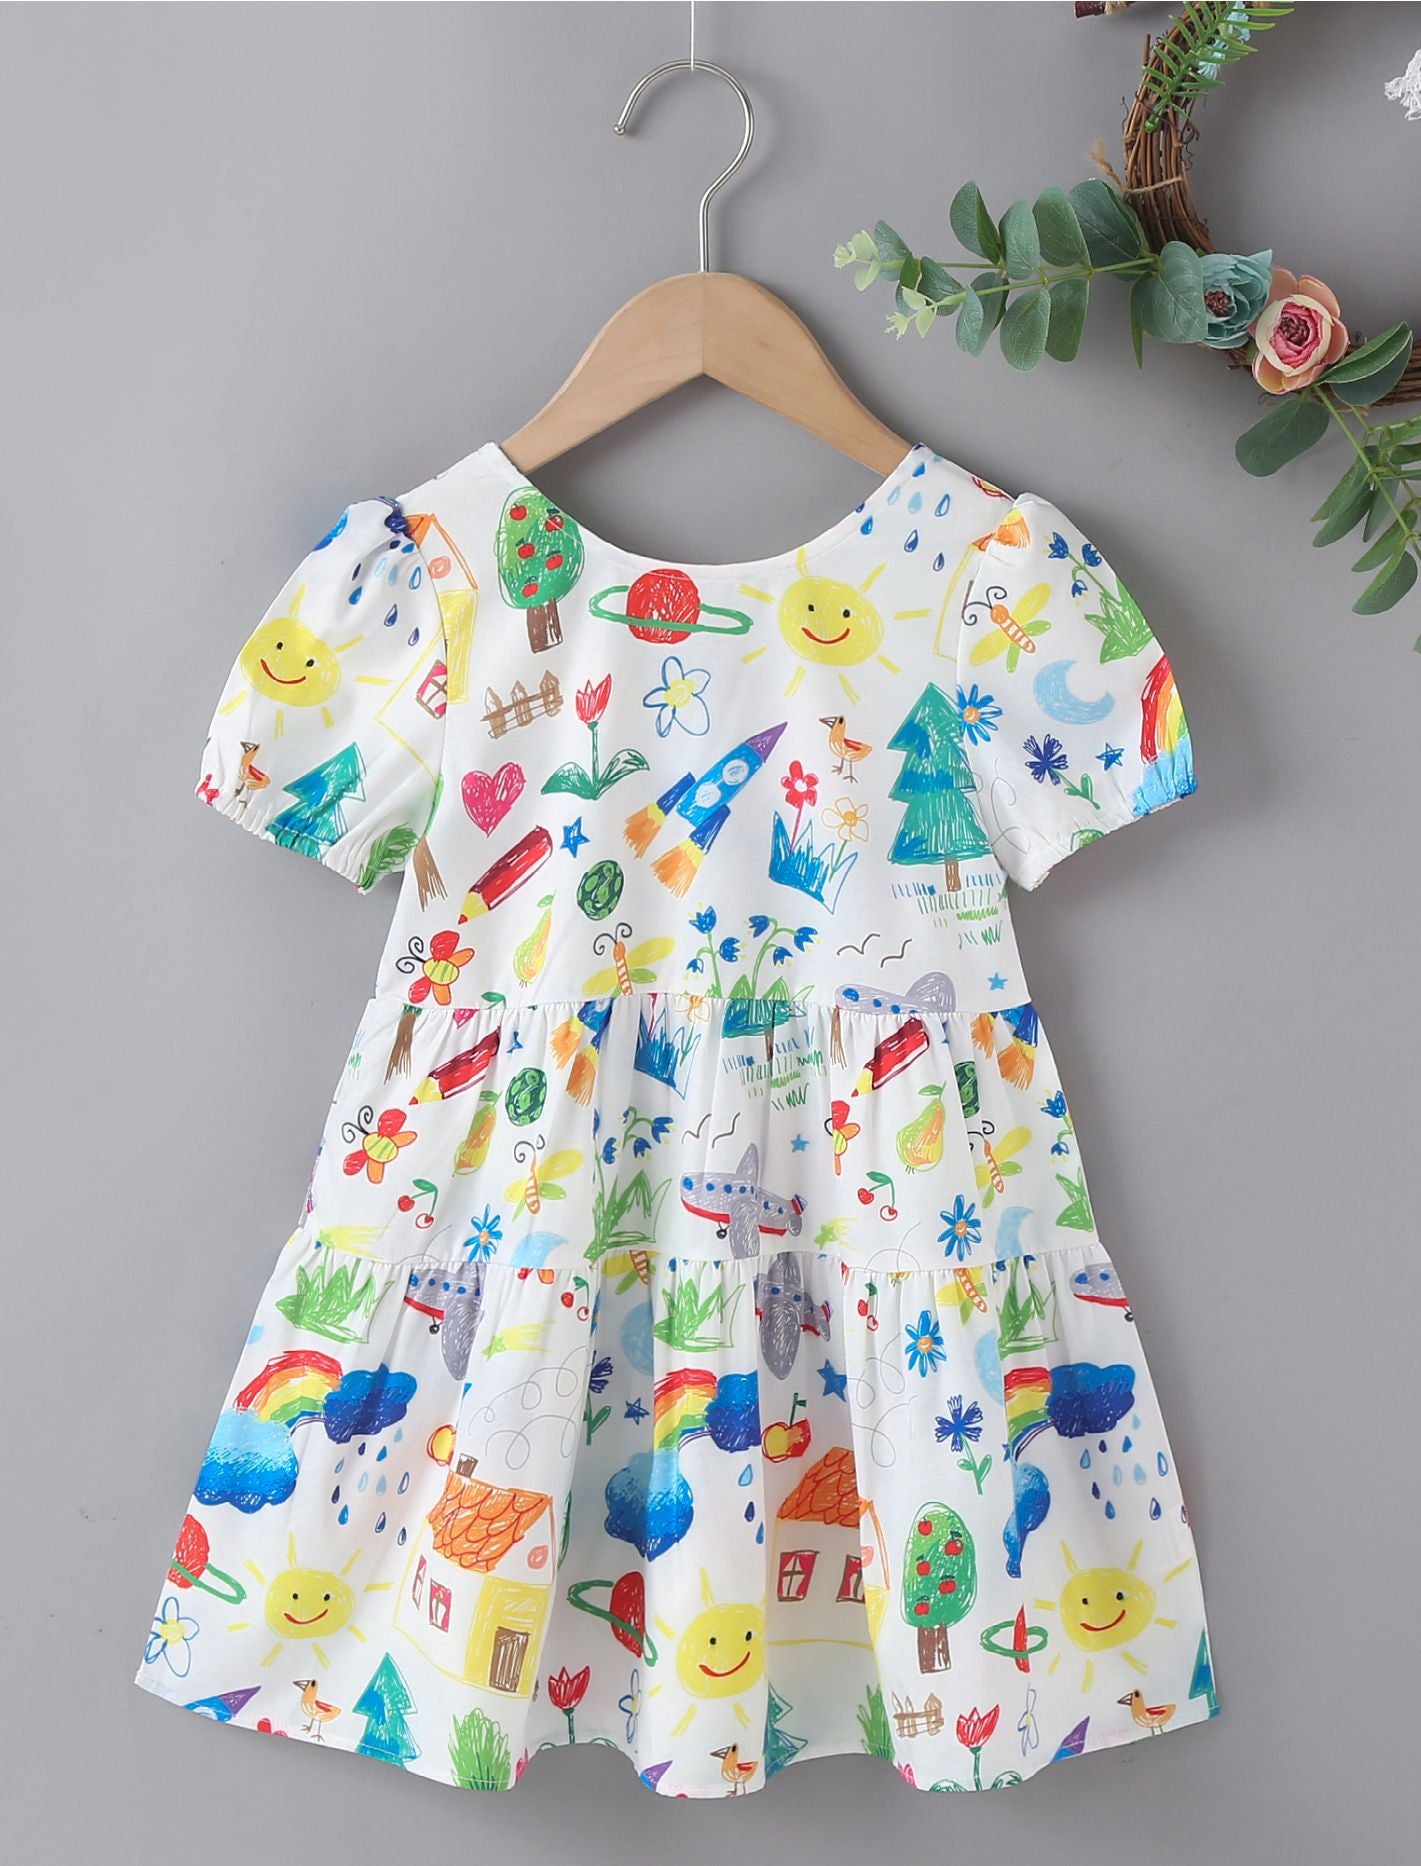 Baby Print Pattern Bow Patched Design Short Sleeve Dress In Summer